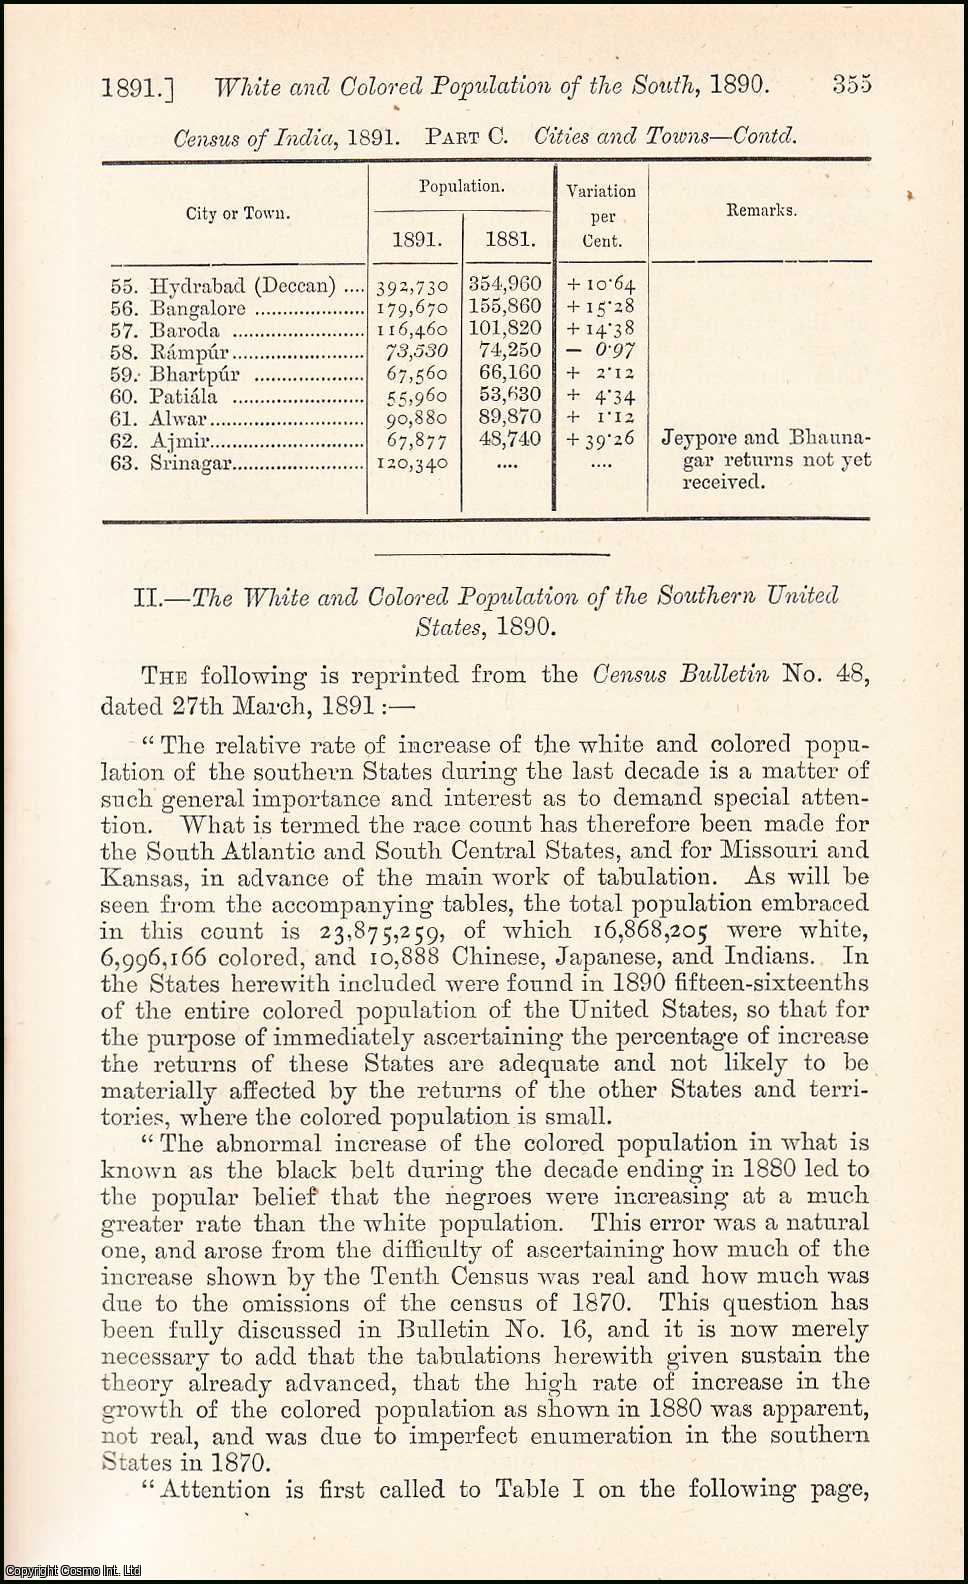 No Author Stated - The White & Colored Population of the Southern United States, 1890. An uncommon original article from the Journal of the Royal Statistical Society of London, 1891.